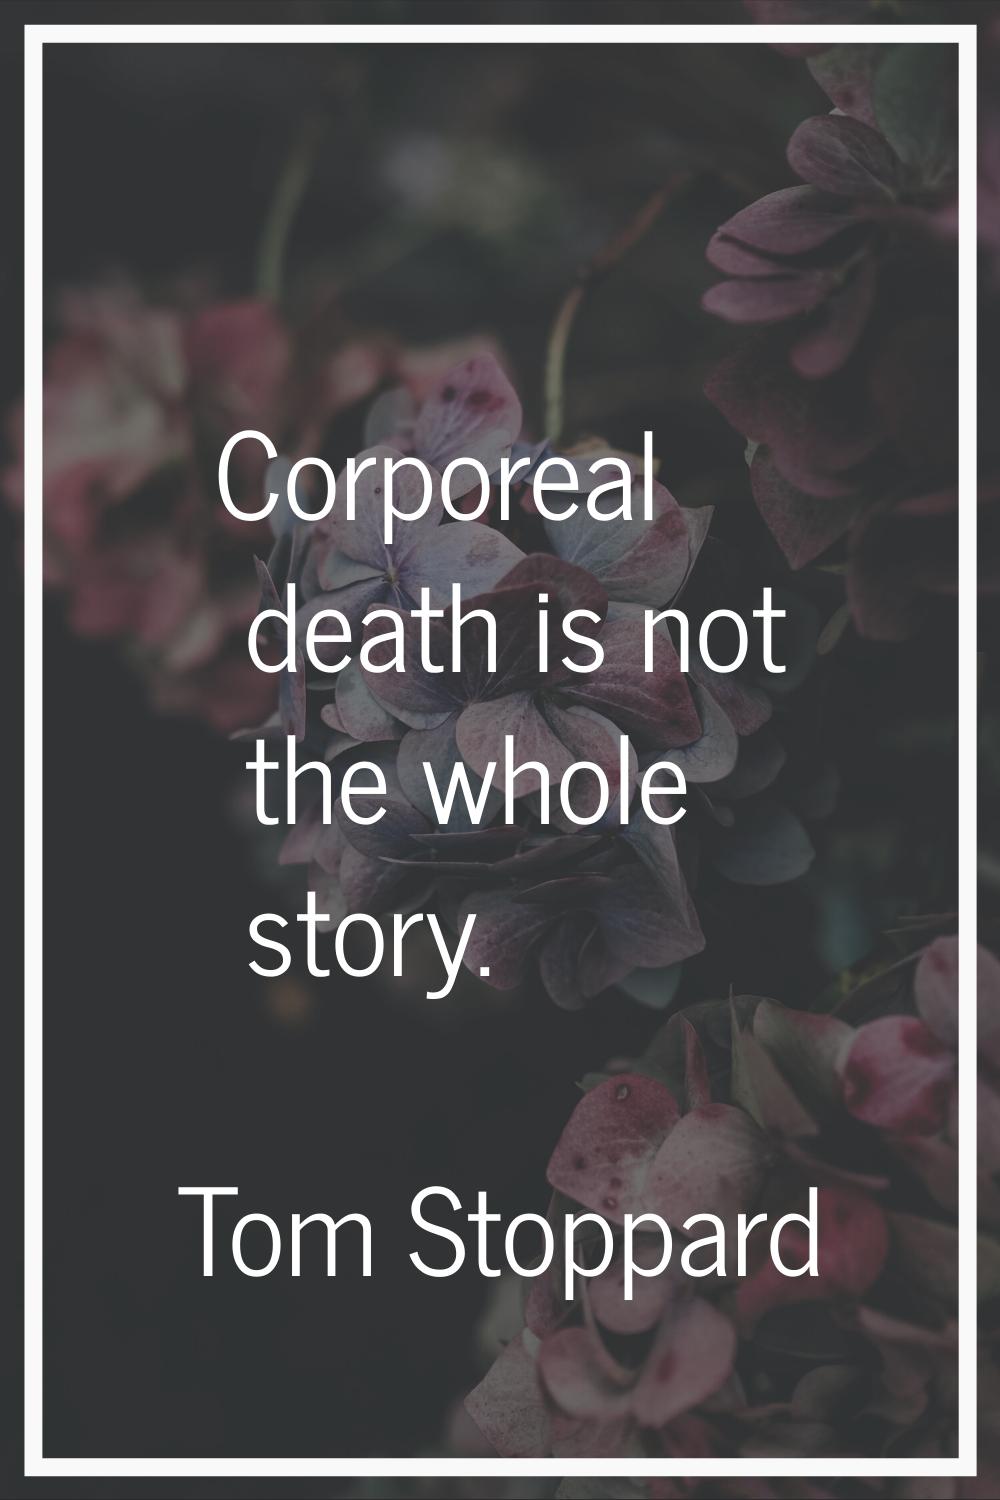 Corporeal death is not the whole story.